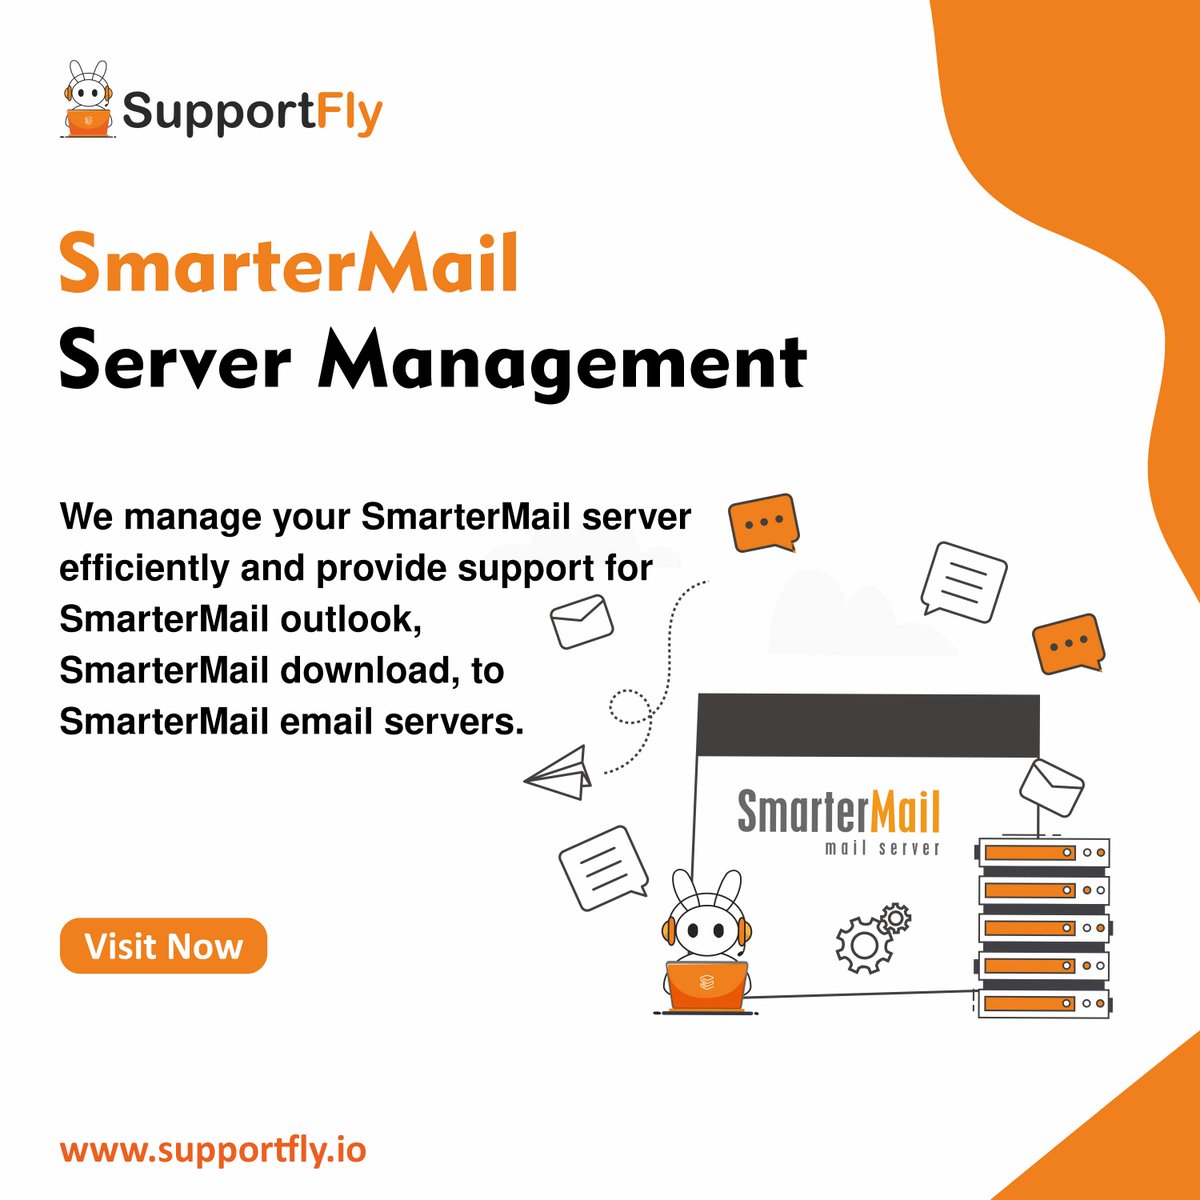 Enhance Your Email Solutions: Discover How SupportFly Transforms SmarterMail Server Management for Unmatched Efficiency and Security.
#smartermail #smartermailserver #smartermailprovider #smartermaillicense #mailserver #emailserver#servermanagement #serversolutions #supportfly